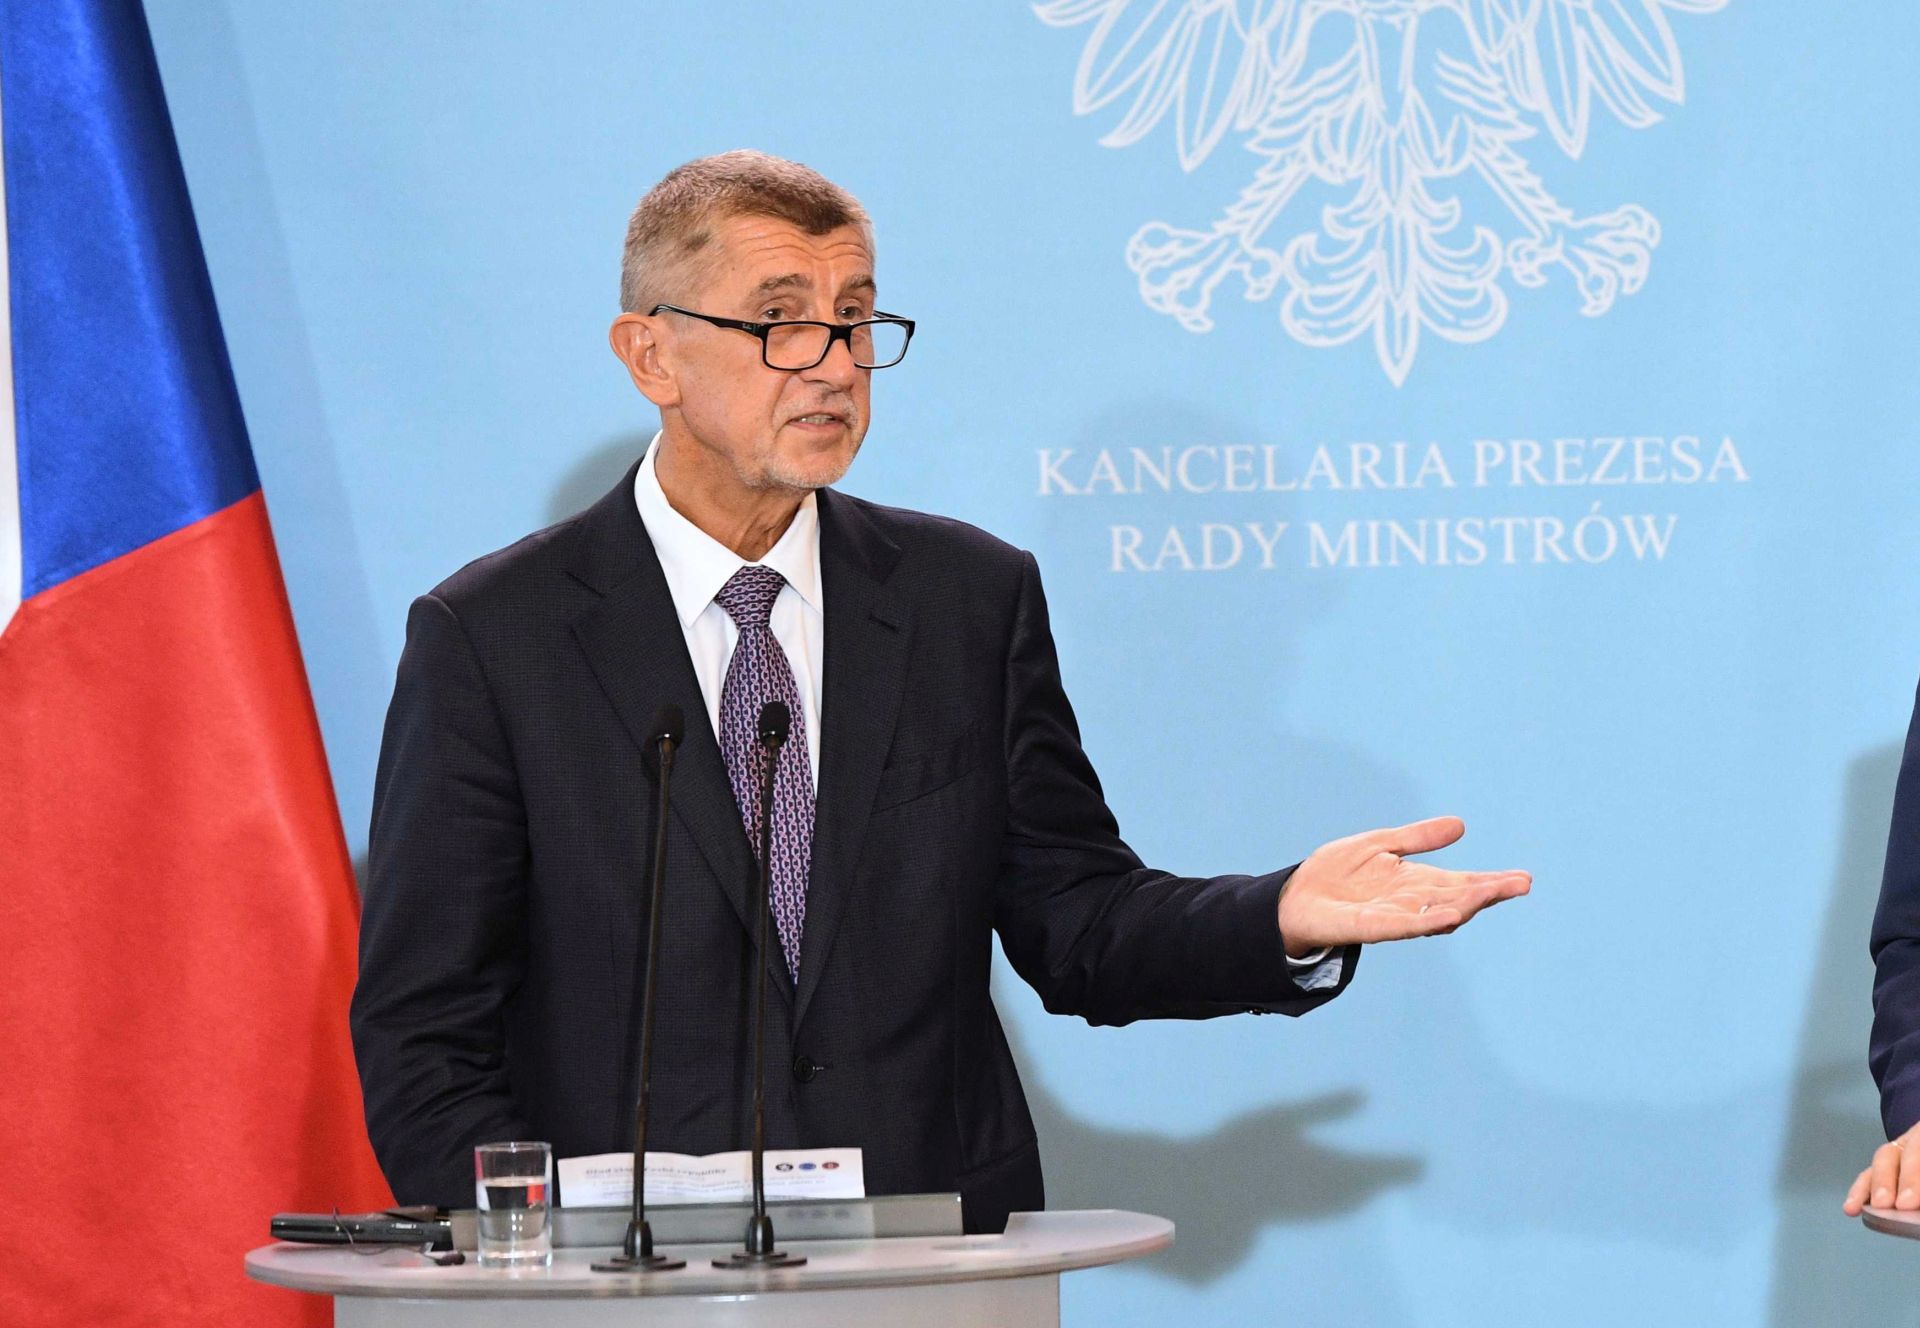 epa07799340 Czech Prime Minister Andrei Babis (L) and Polish Prime Minister Mateusz Morawiecki (R) hold a joint press conference after their meeting in Warsaw, Poland, 28 August 2019. Andrei Babis started a visit to Poland during which inter-governmental consultations will be held. Babis and his delegation were welcomed in Warsaw by Polish PM Mateusz Morawiecki.  EPA/RADEK PIETRUSZKA POLAND OUT